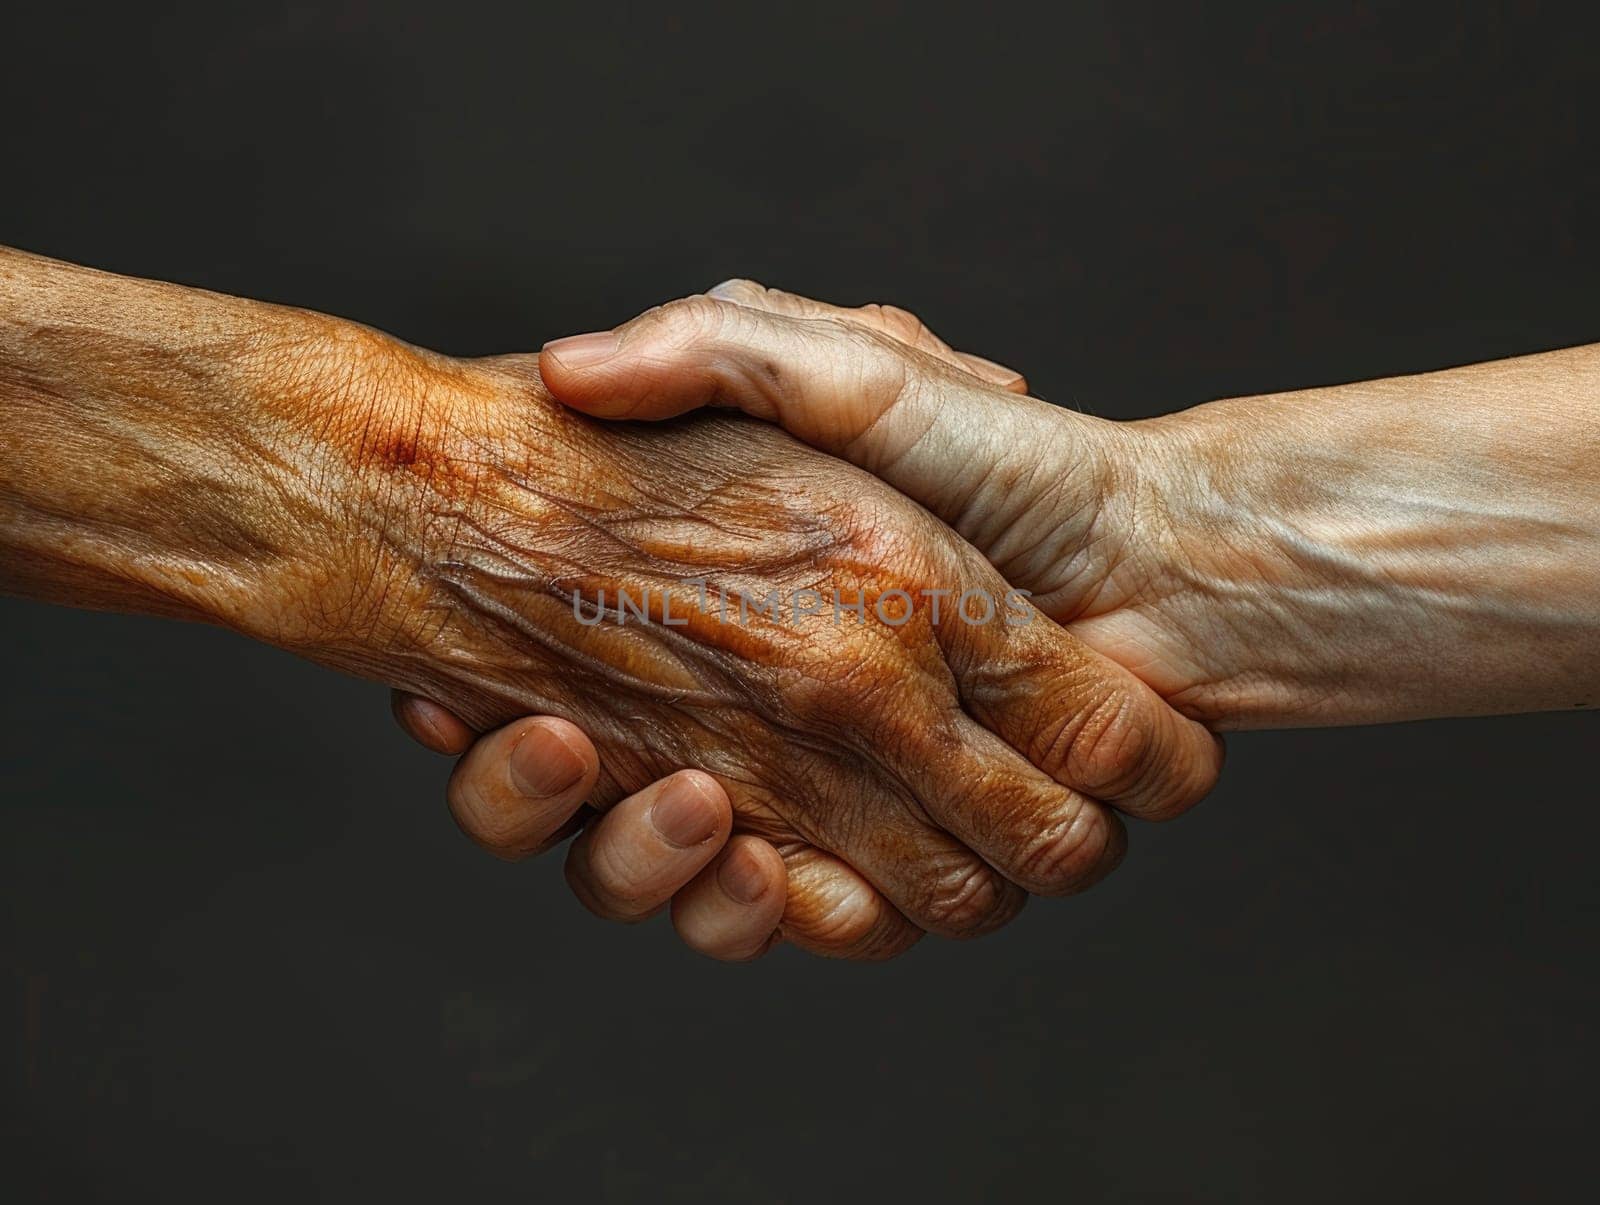 Close-up image showcasing a handshake between two people with diverse skin tones against a dark backdrop, symbolizing unity and partnership.